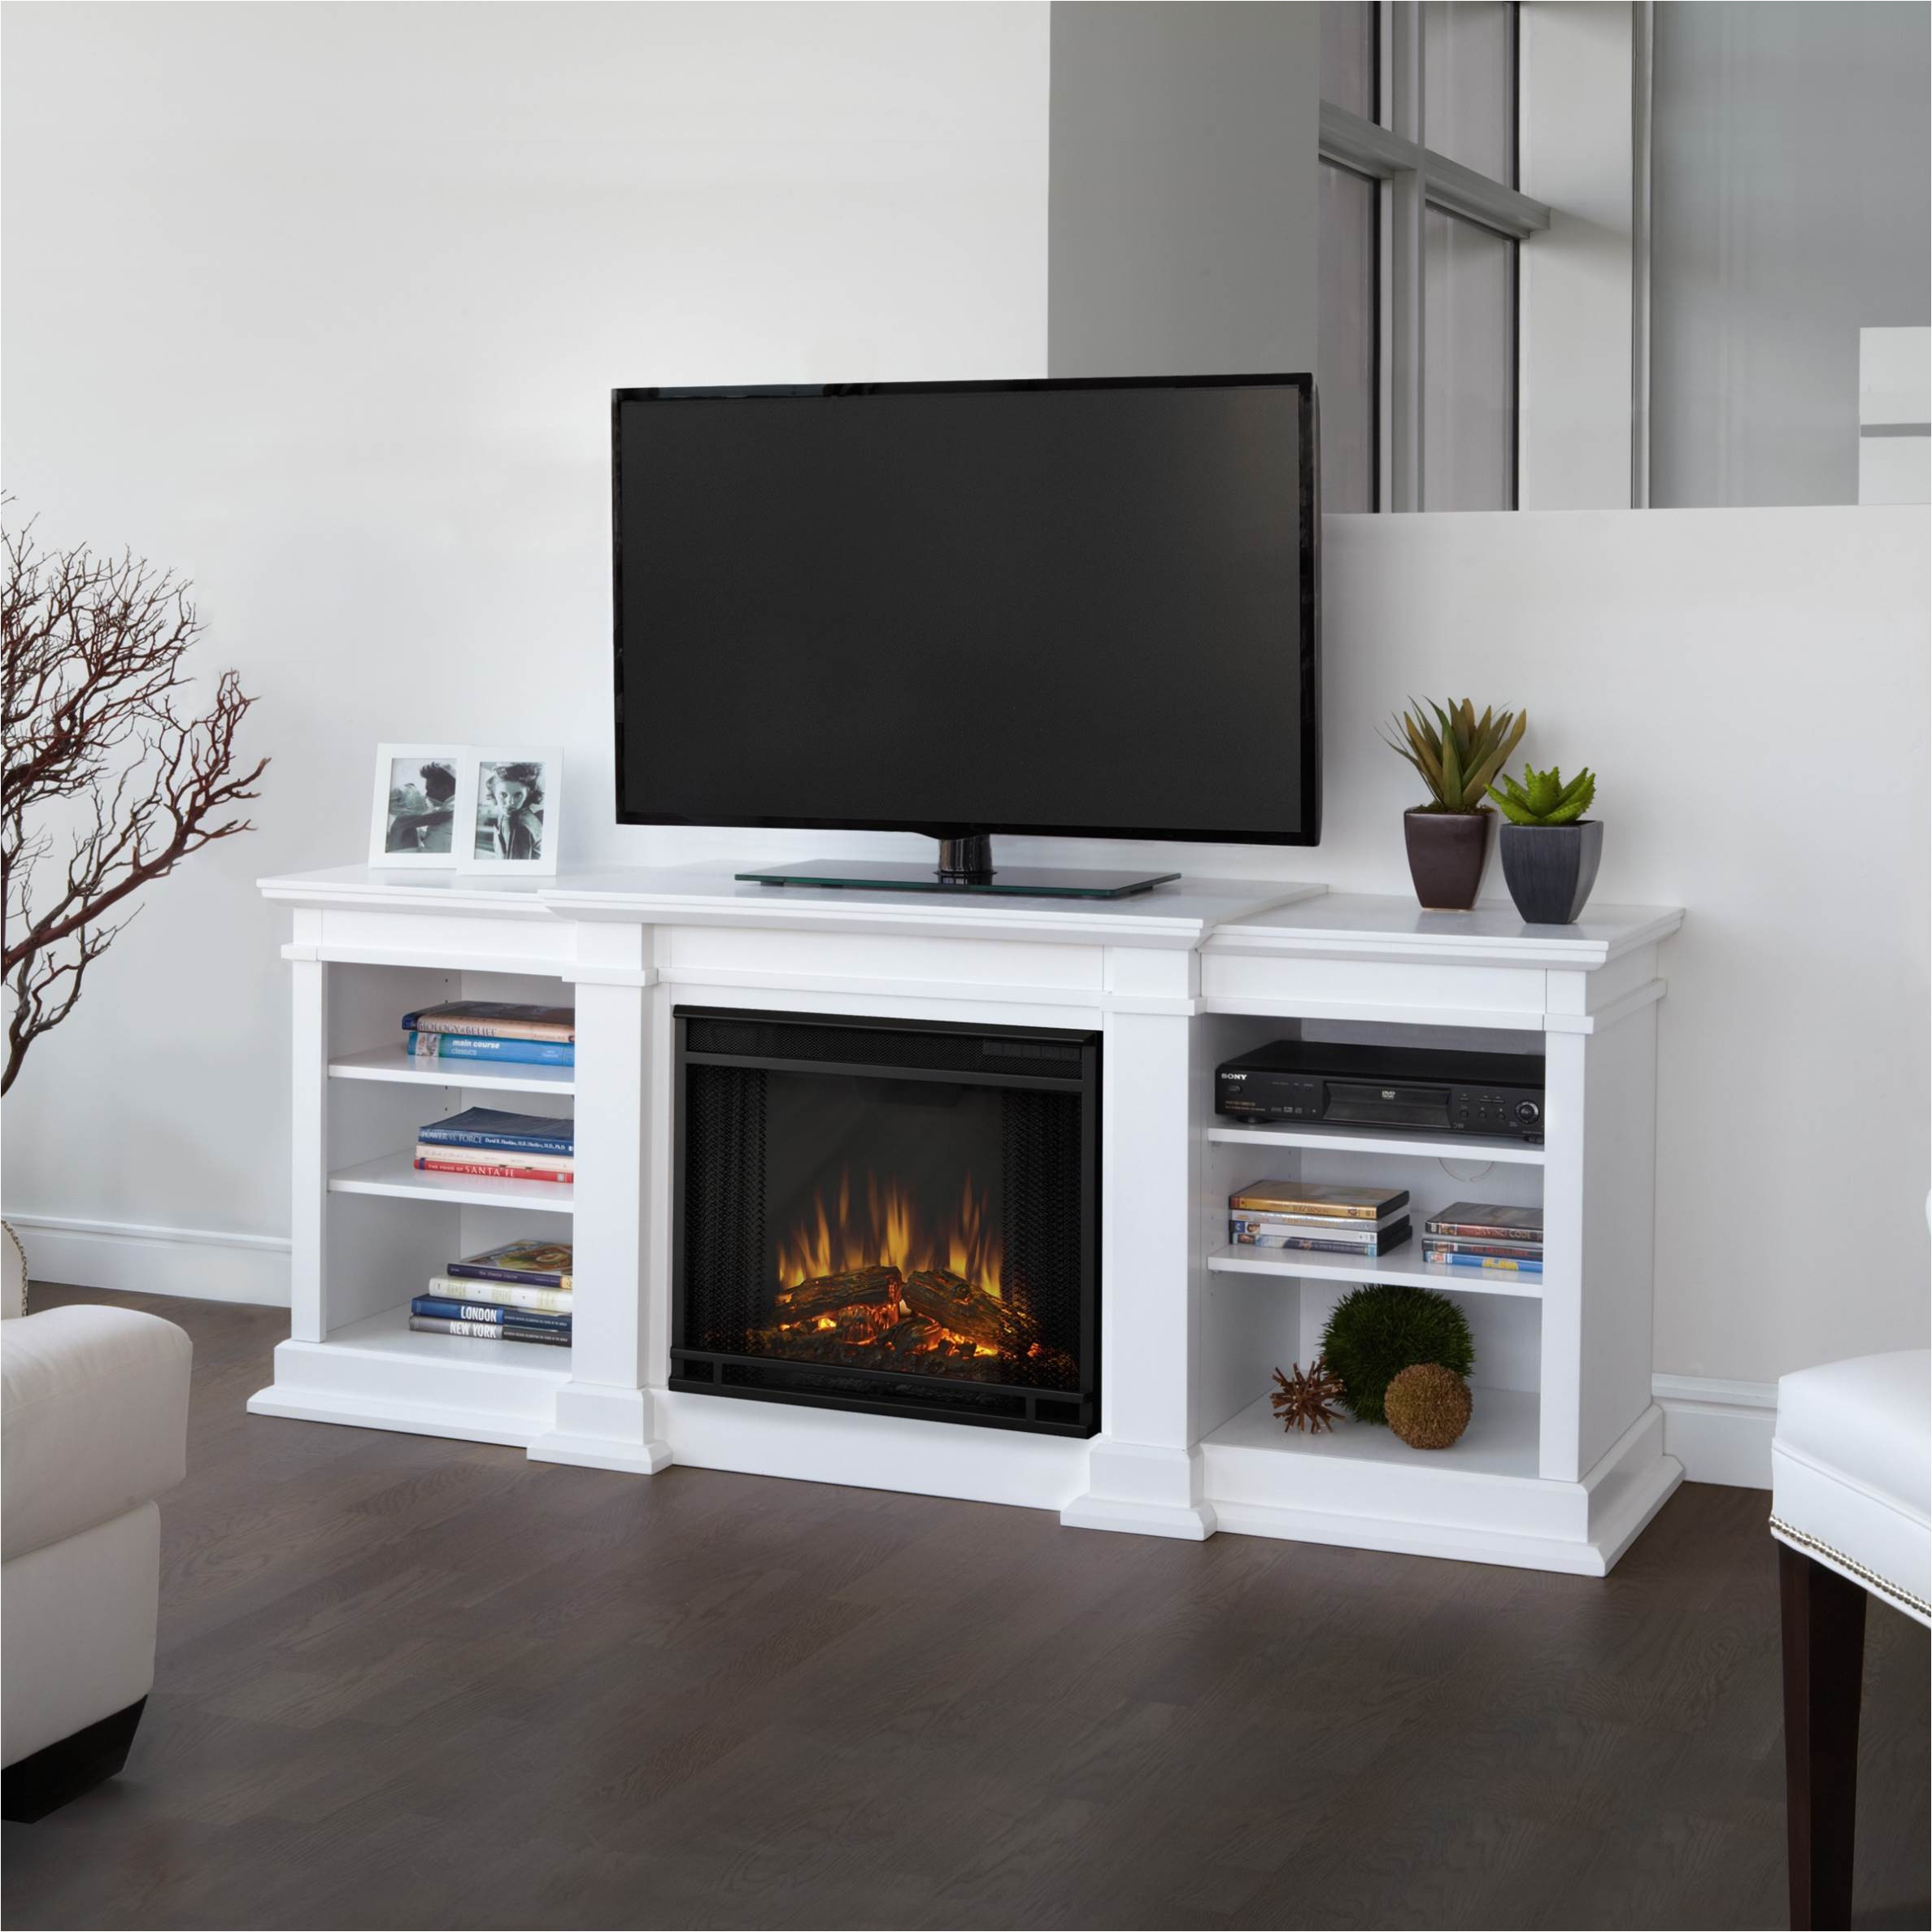 Ember Hearth Electric Fireplace Costco Reviews AdinaPorter